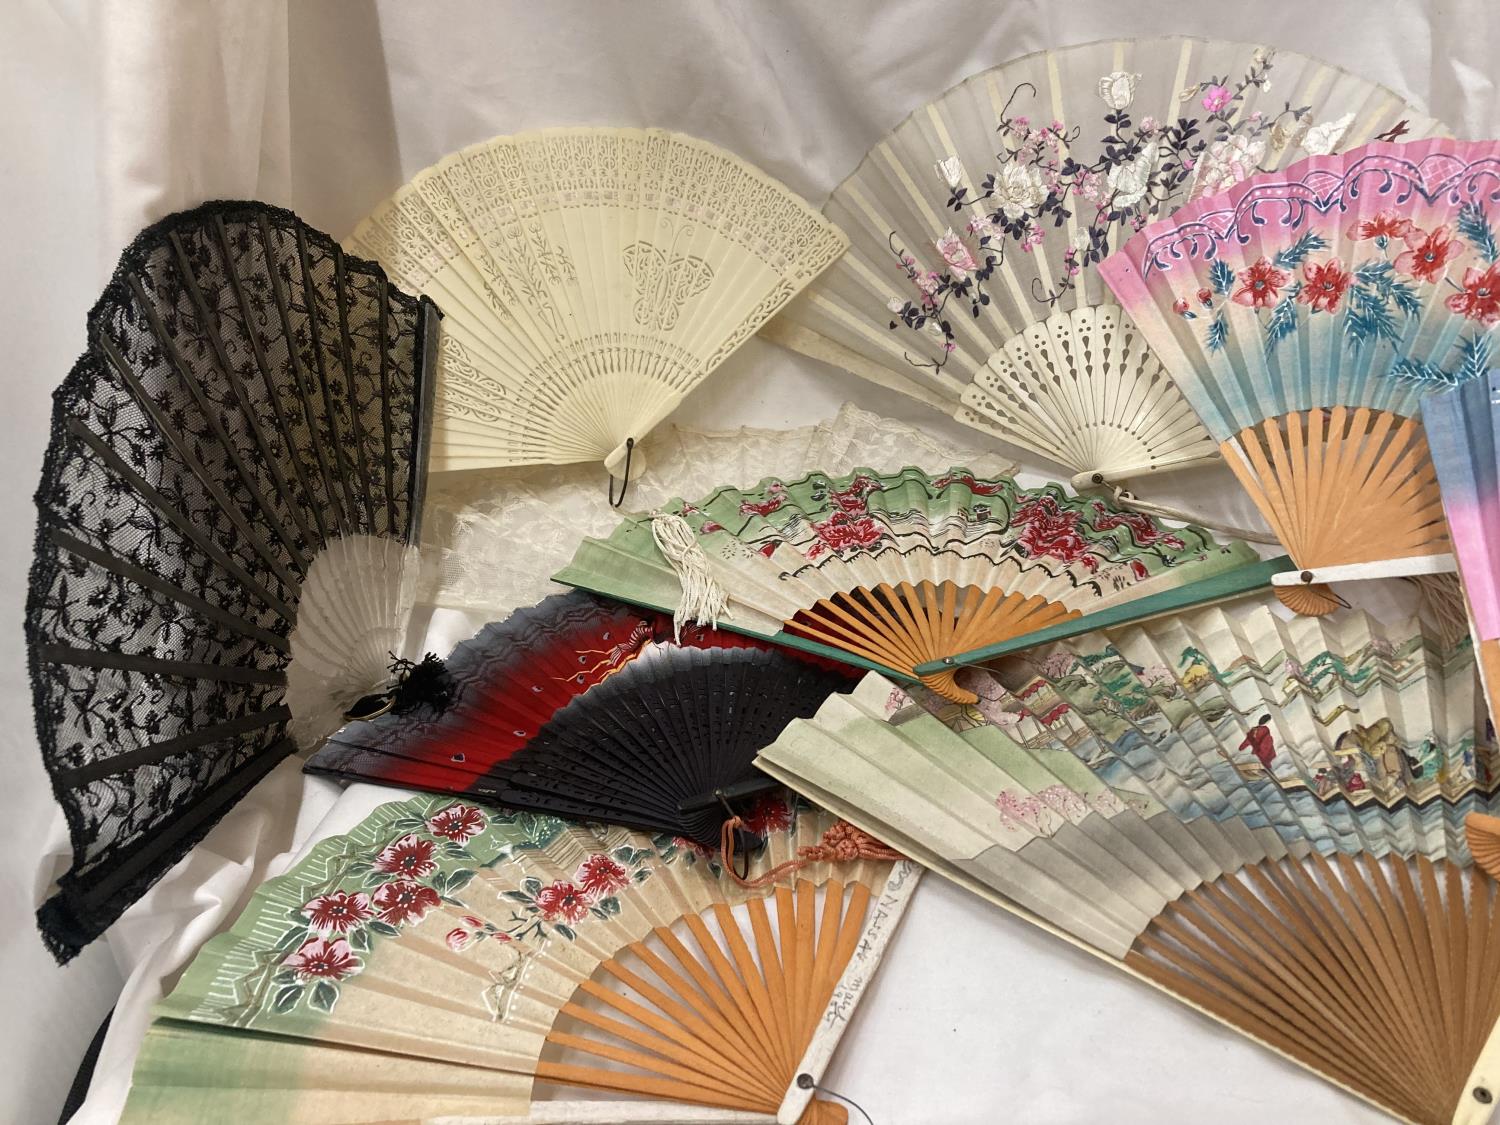 A QUANTITY OF VINTAGE FANS TO INCLUDE PAPER AND LACE EXAMPLES - 10 IN TOTAL - Image 3 of 4